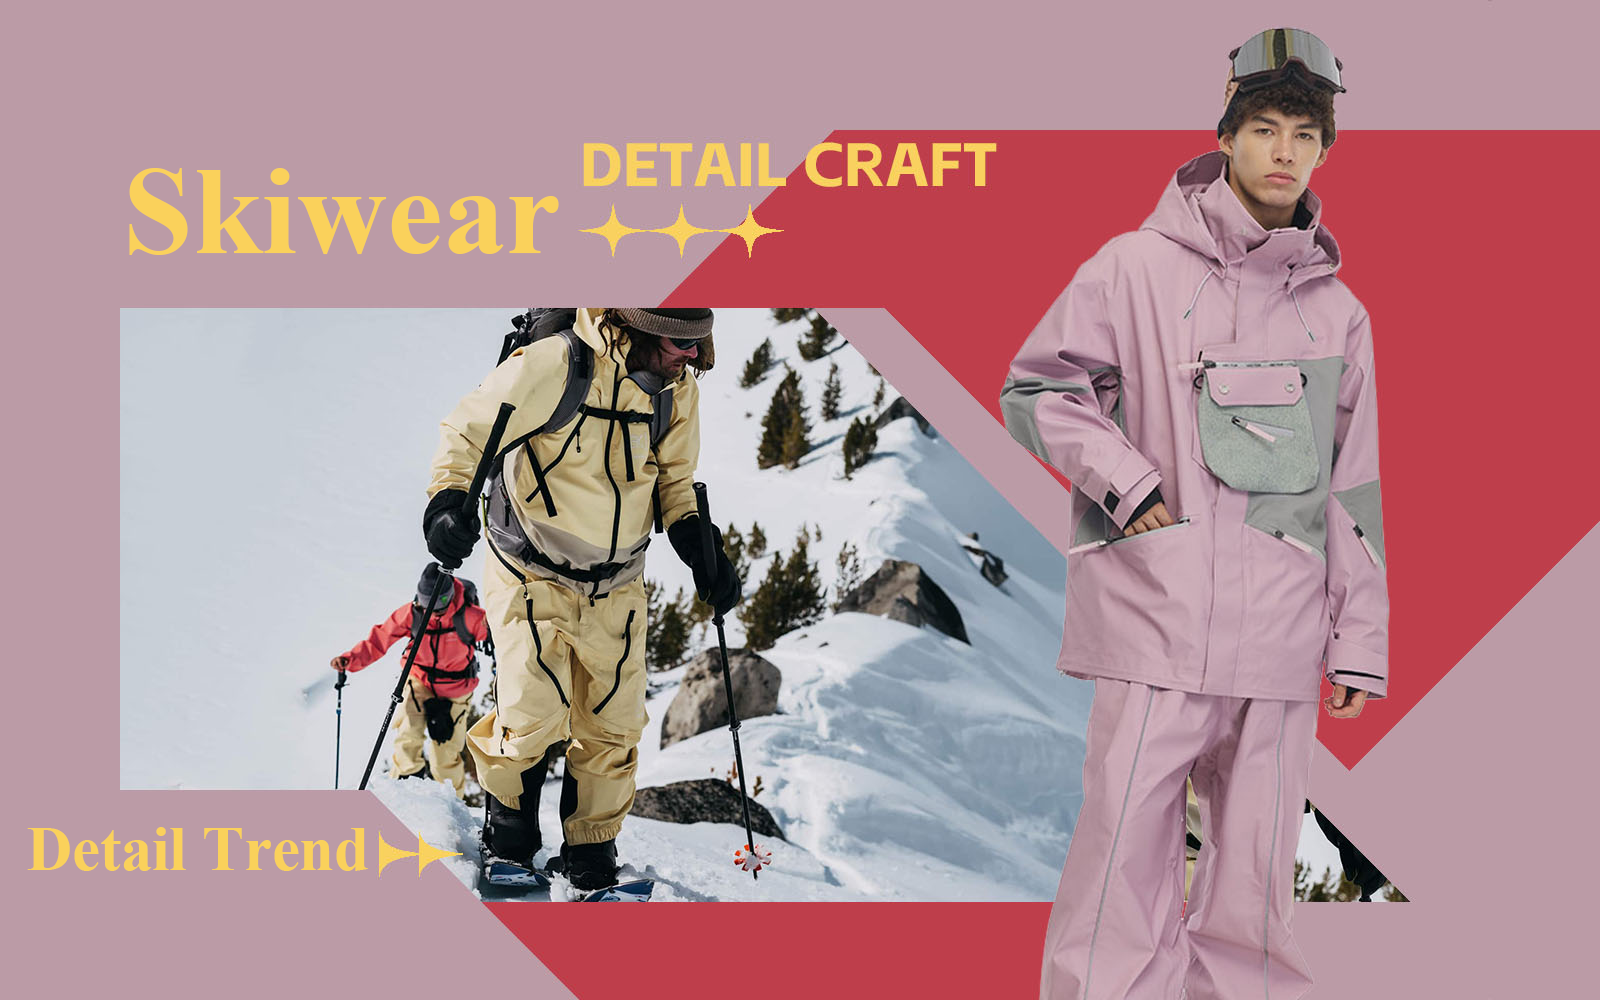 The Detail & Craft Trend for Skiwear